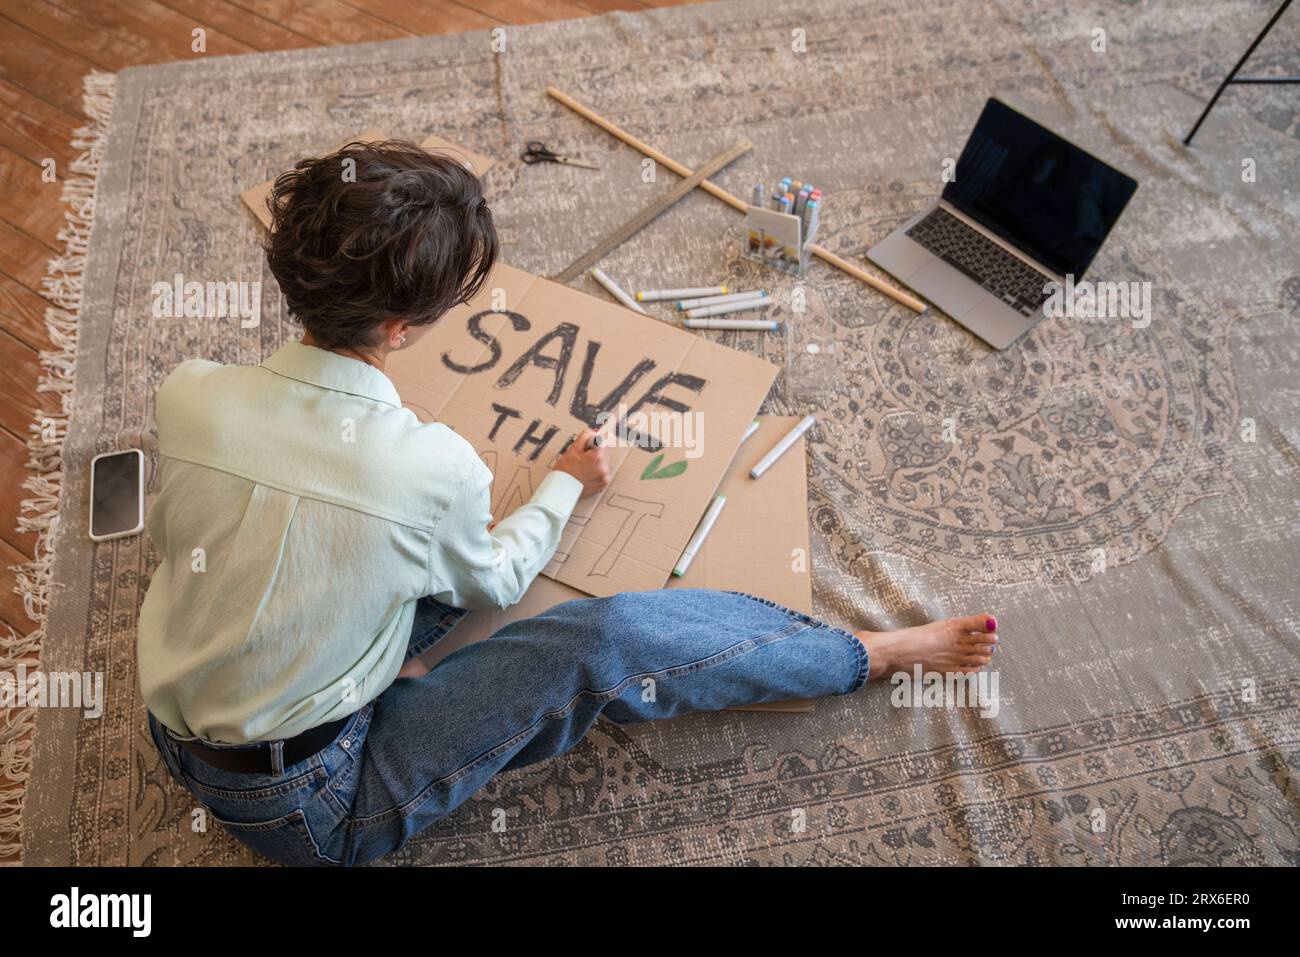 Activist making environment placard in living room Stock Photo